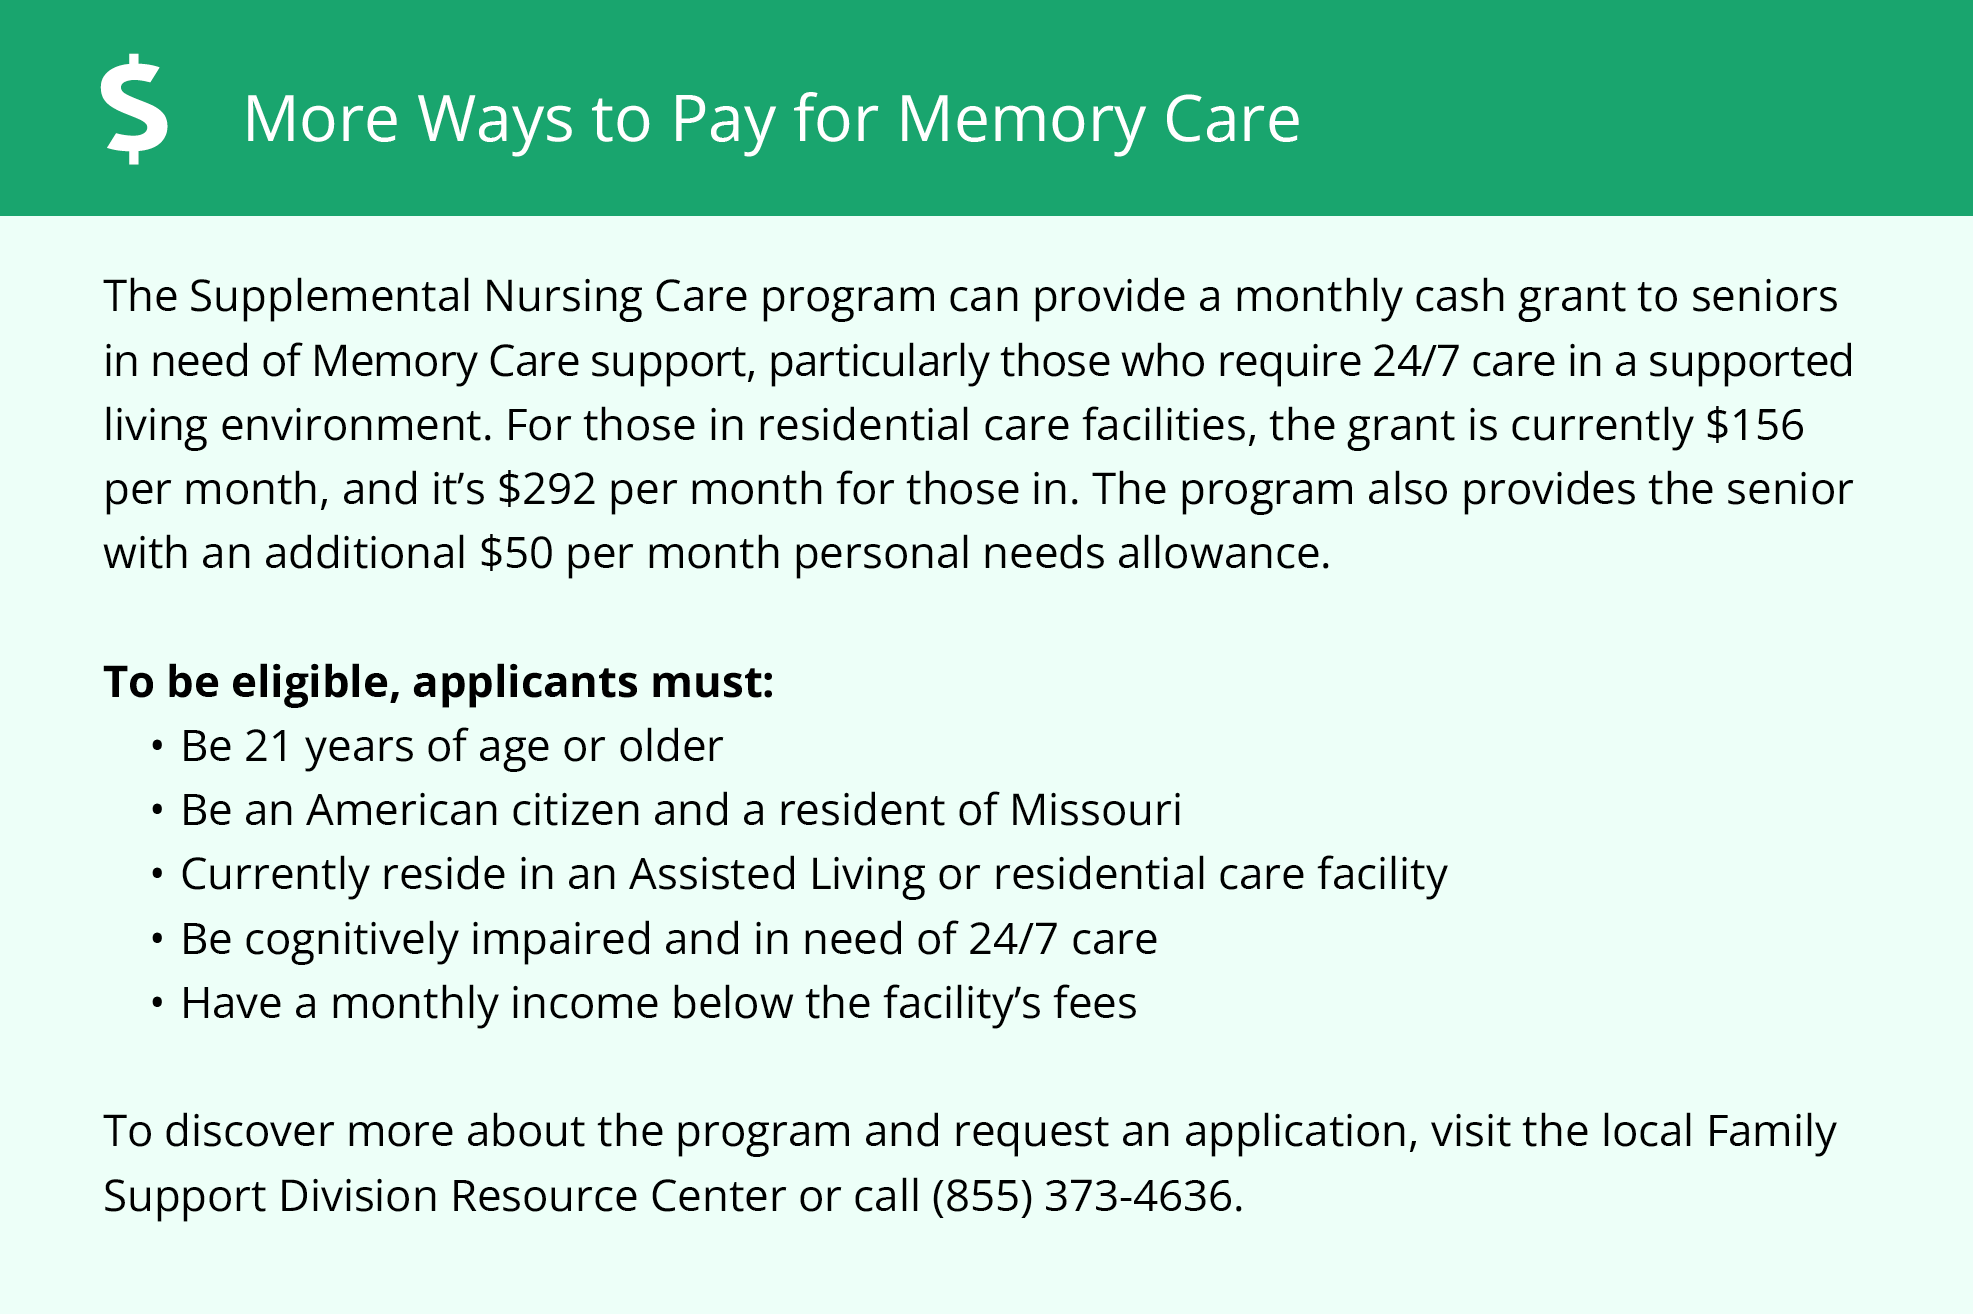 More Ways to Pay for Memory Care - Missouri